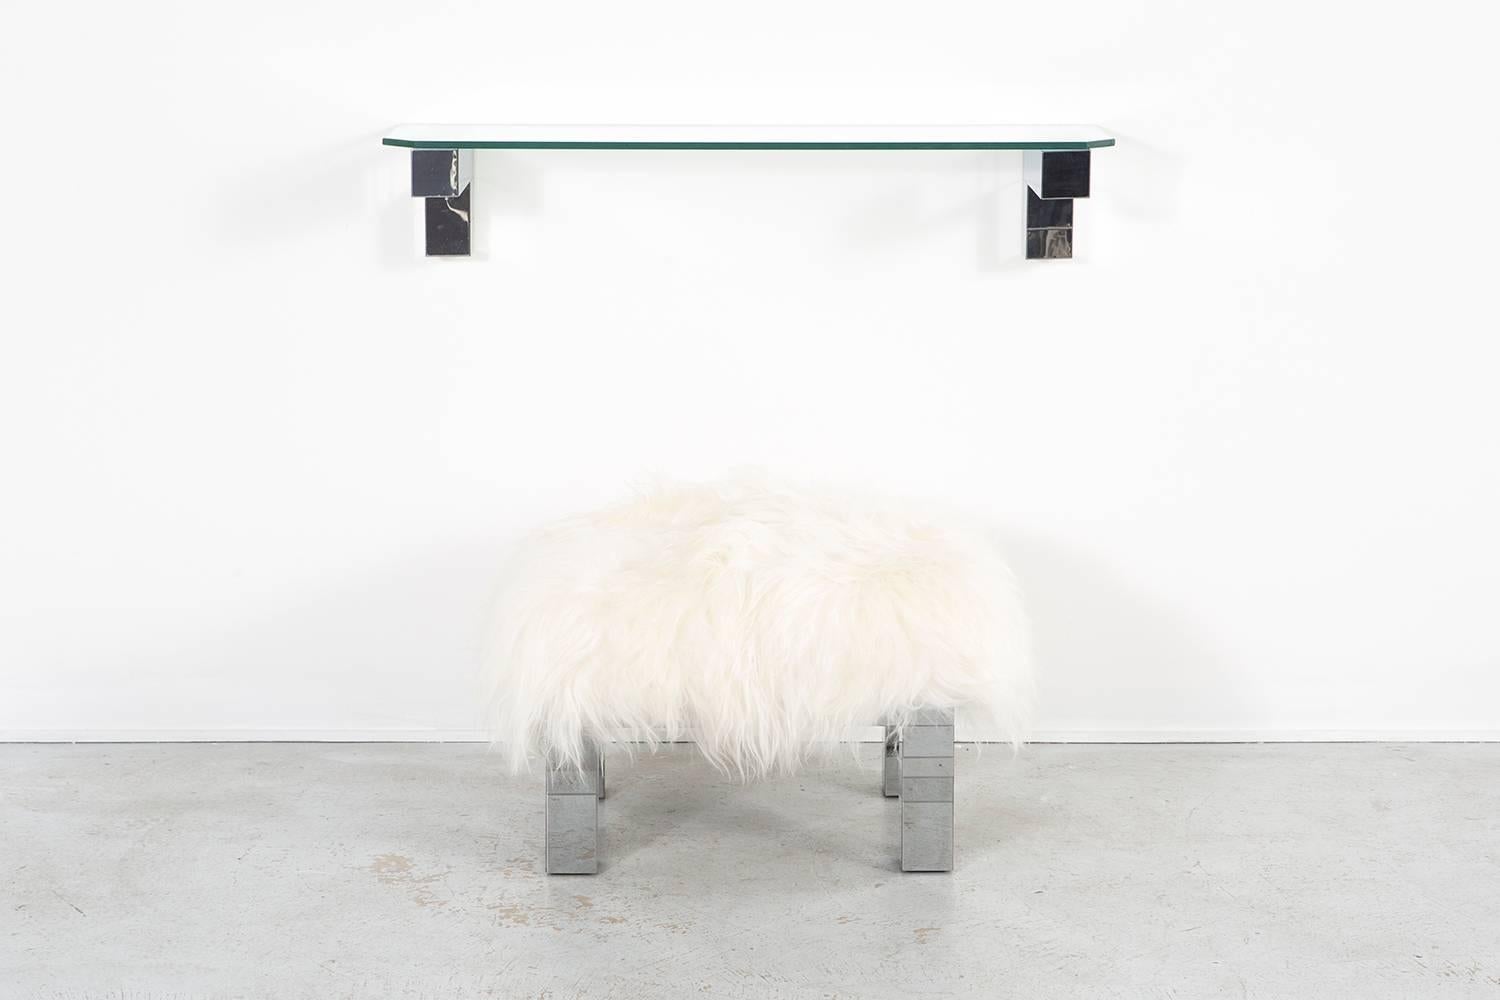 Floating shelf and stool set

designed by Paul Evans for Directional

USA, circa 1970s

chrome and glass with the stool reupholstered in Mongolian sheepskin

shelf 12 ½” H x 46” W x 12” D

stool 18 13/16” H x 26 ¾” W x 20 ¼” D x seat 18